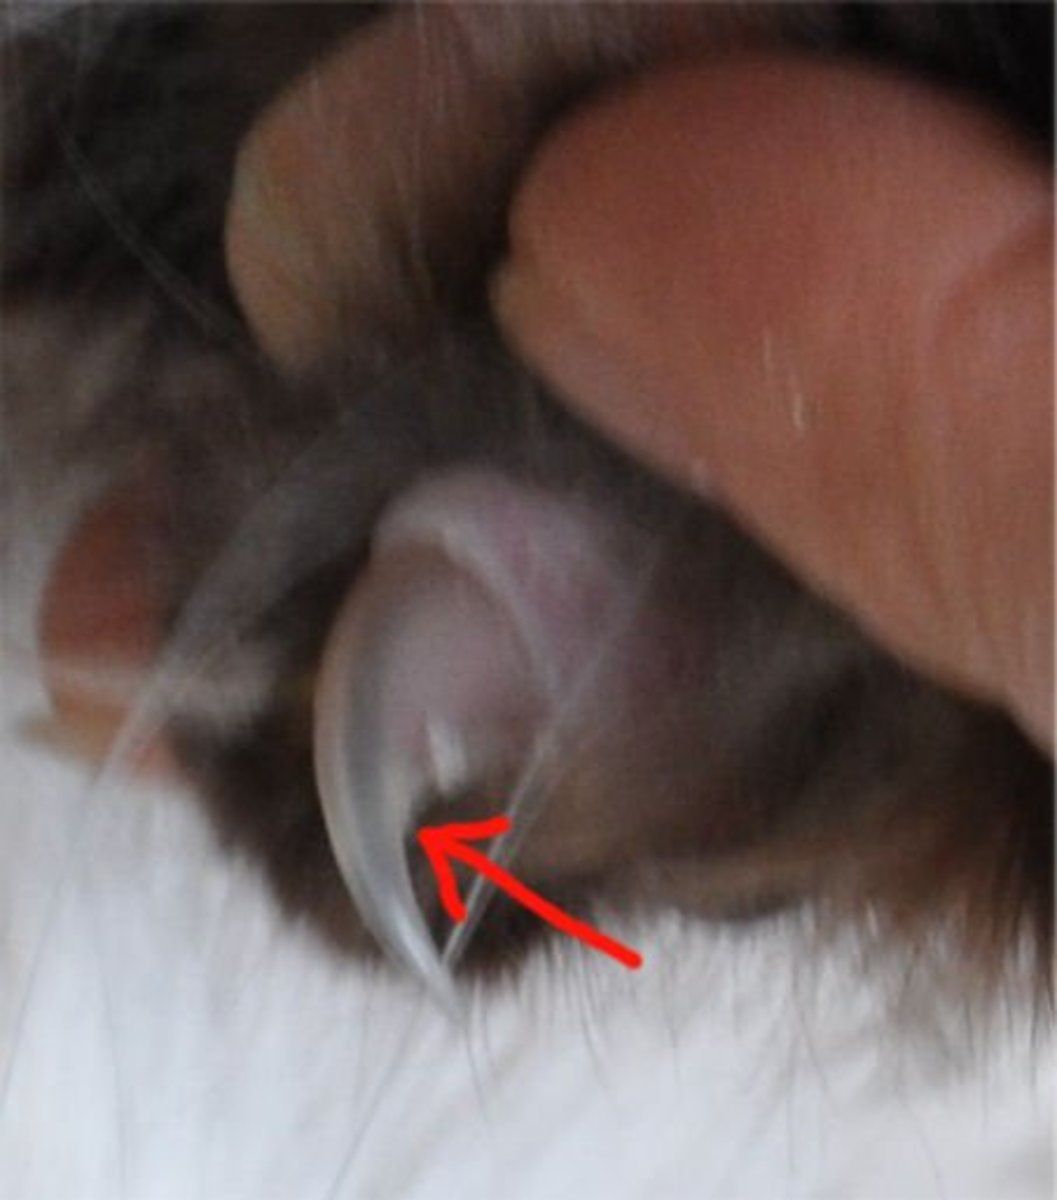 The red arrow shows where the pink part of the claw starts. When clipping, clip only the very tip. Stay away from the pink area.